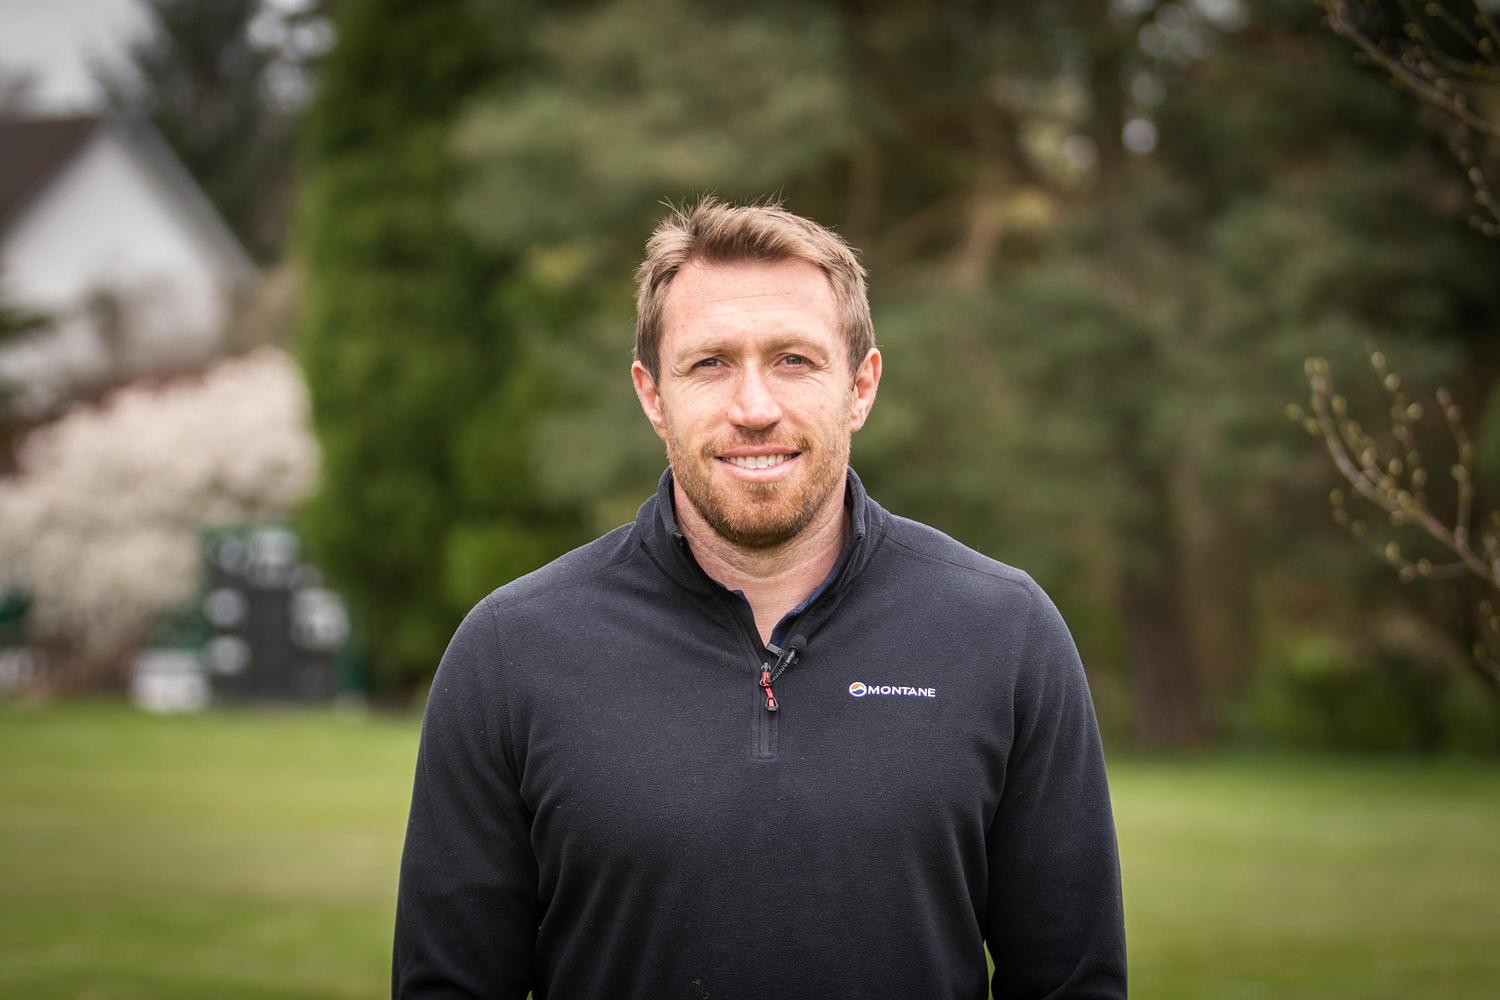 Strathallan signs former Scotland rugby star as Director of Sport